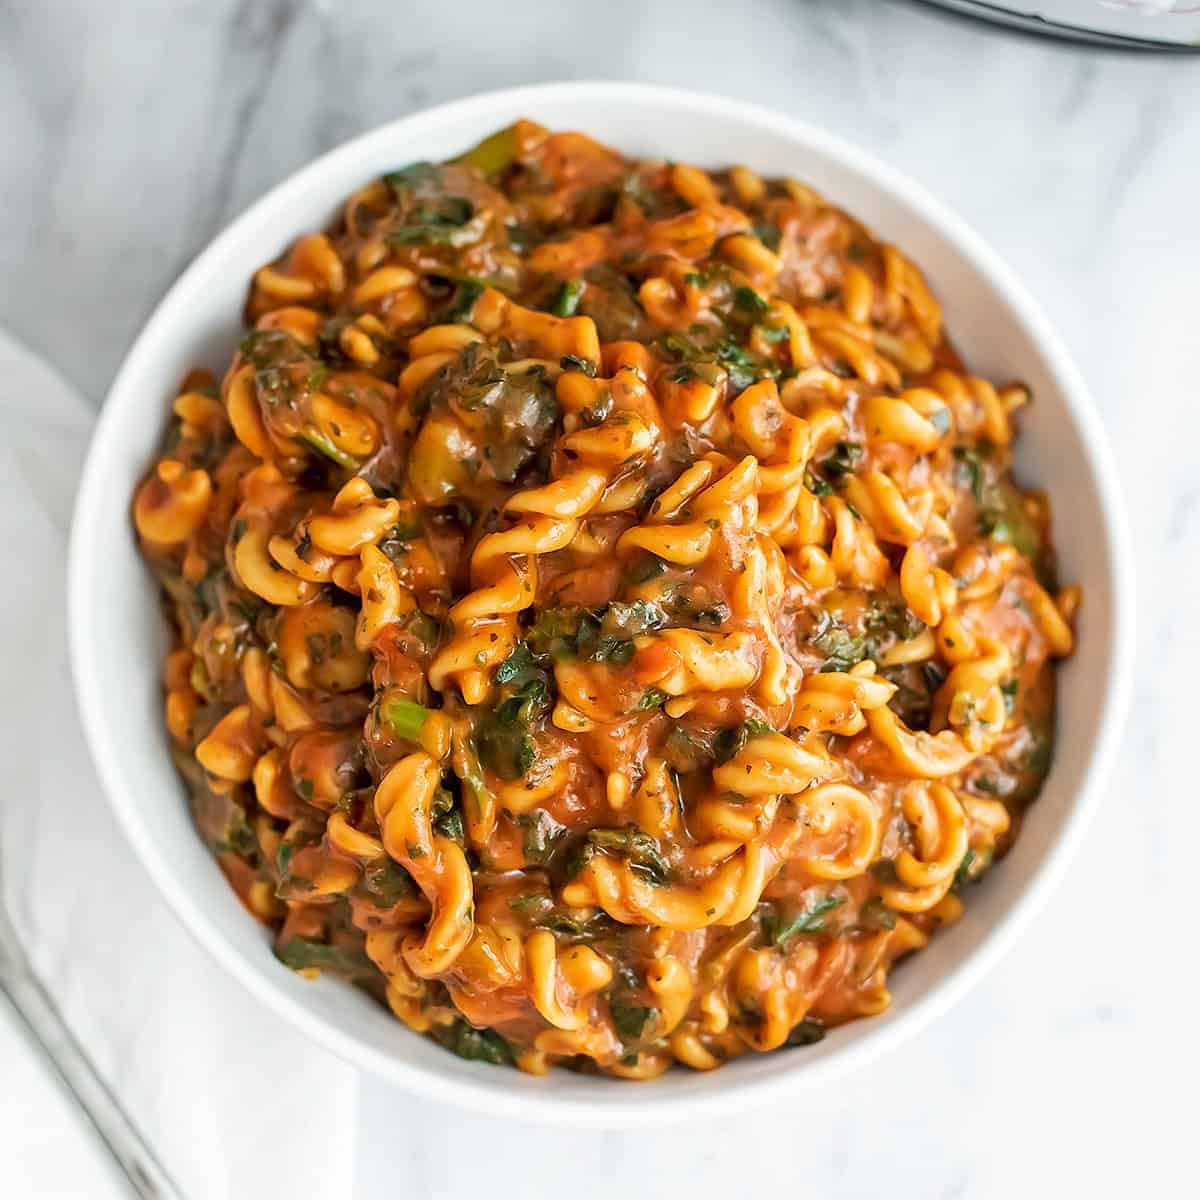 Instant Pot Chickpea Pasta - Easy One Pot Meal | Bites of Wellness